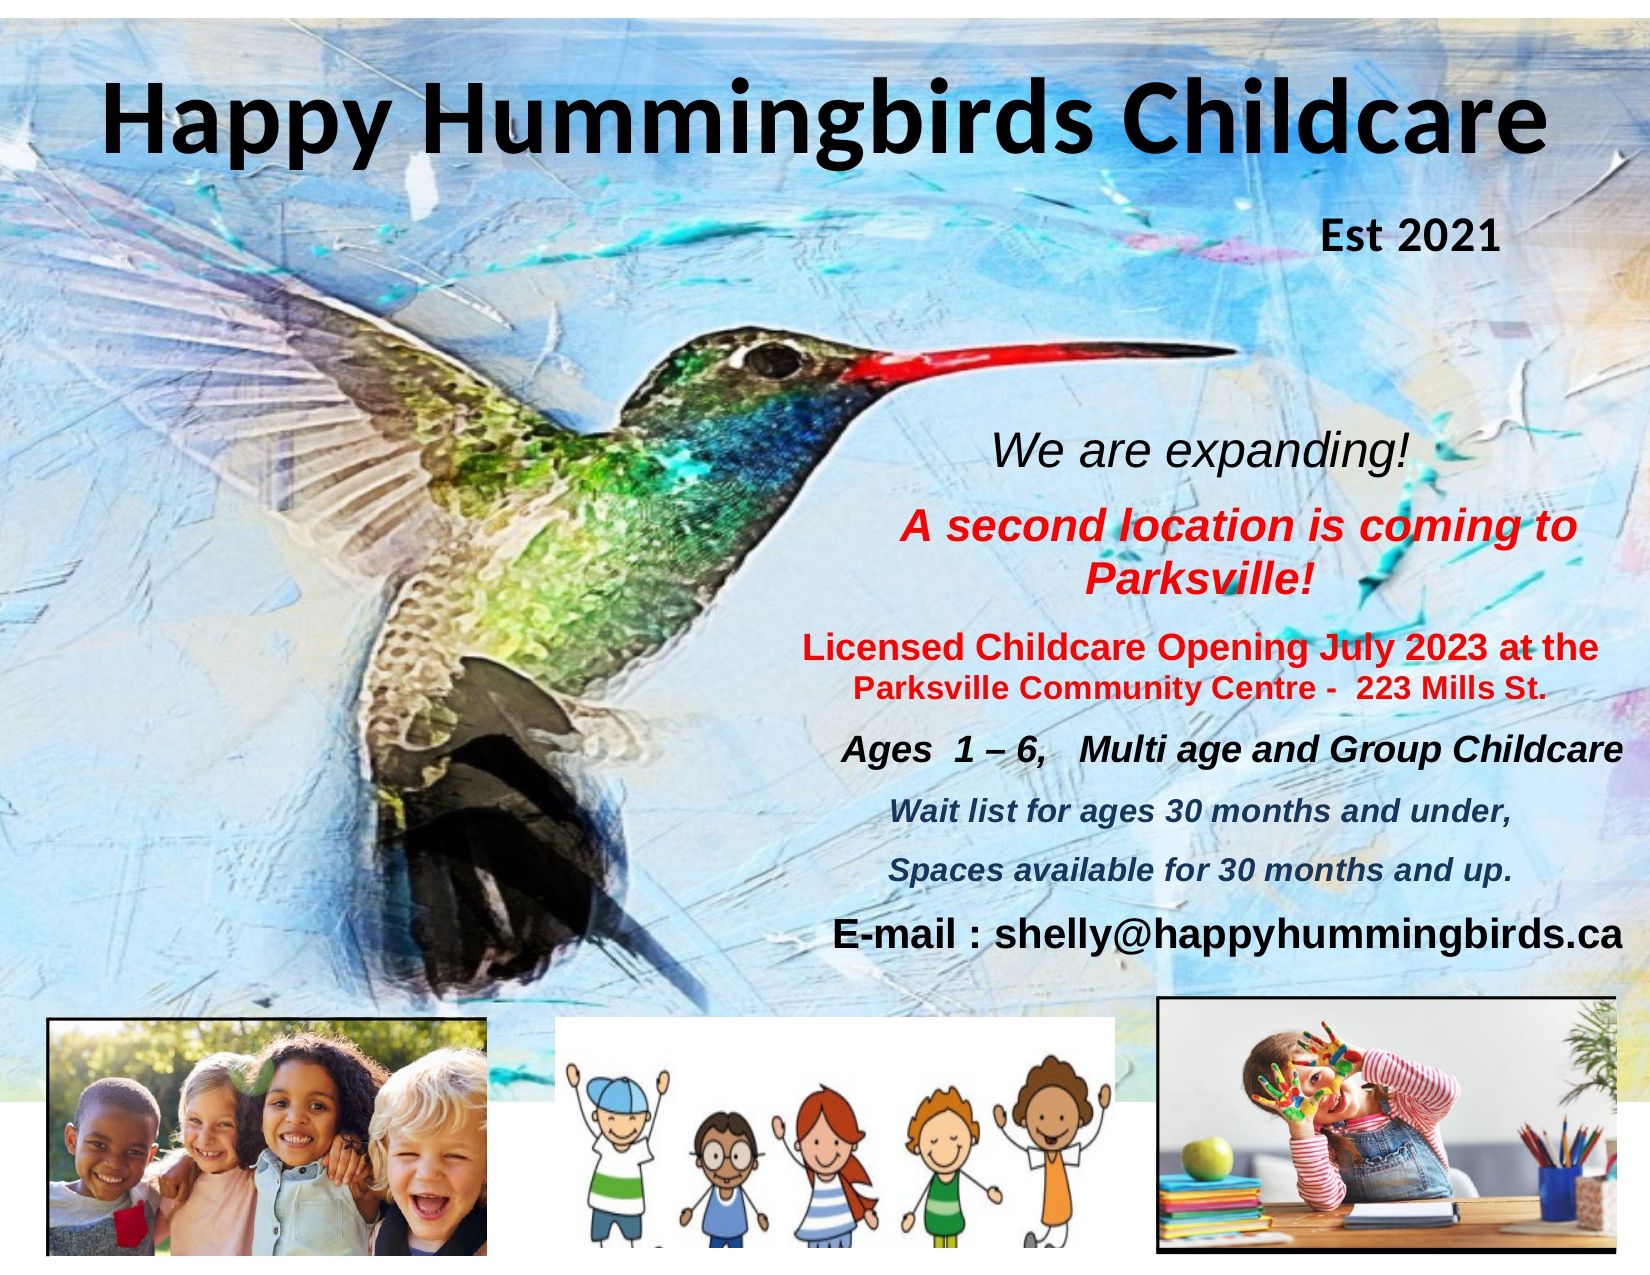 A poster for Hummingbird Childcare